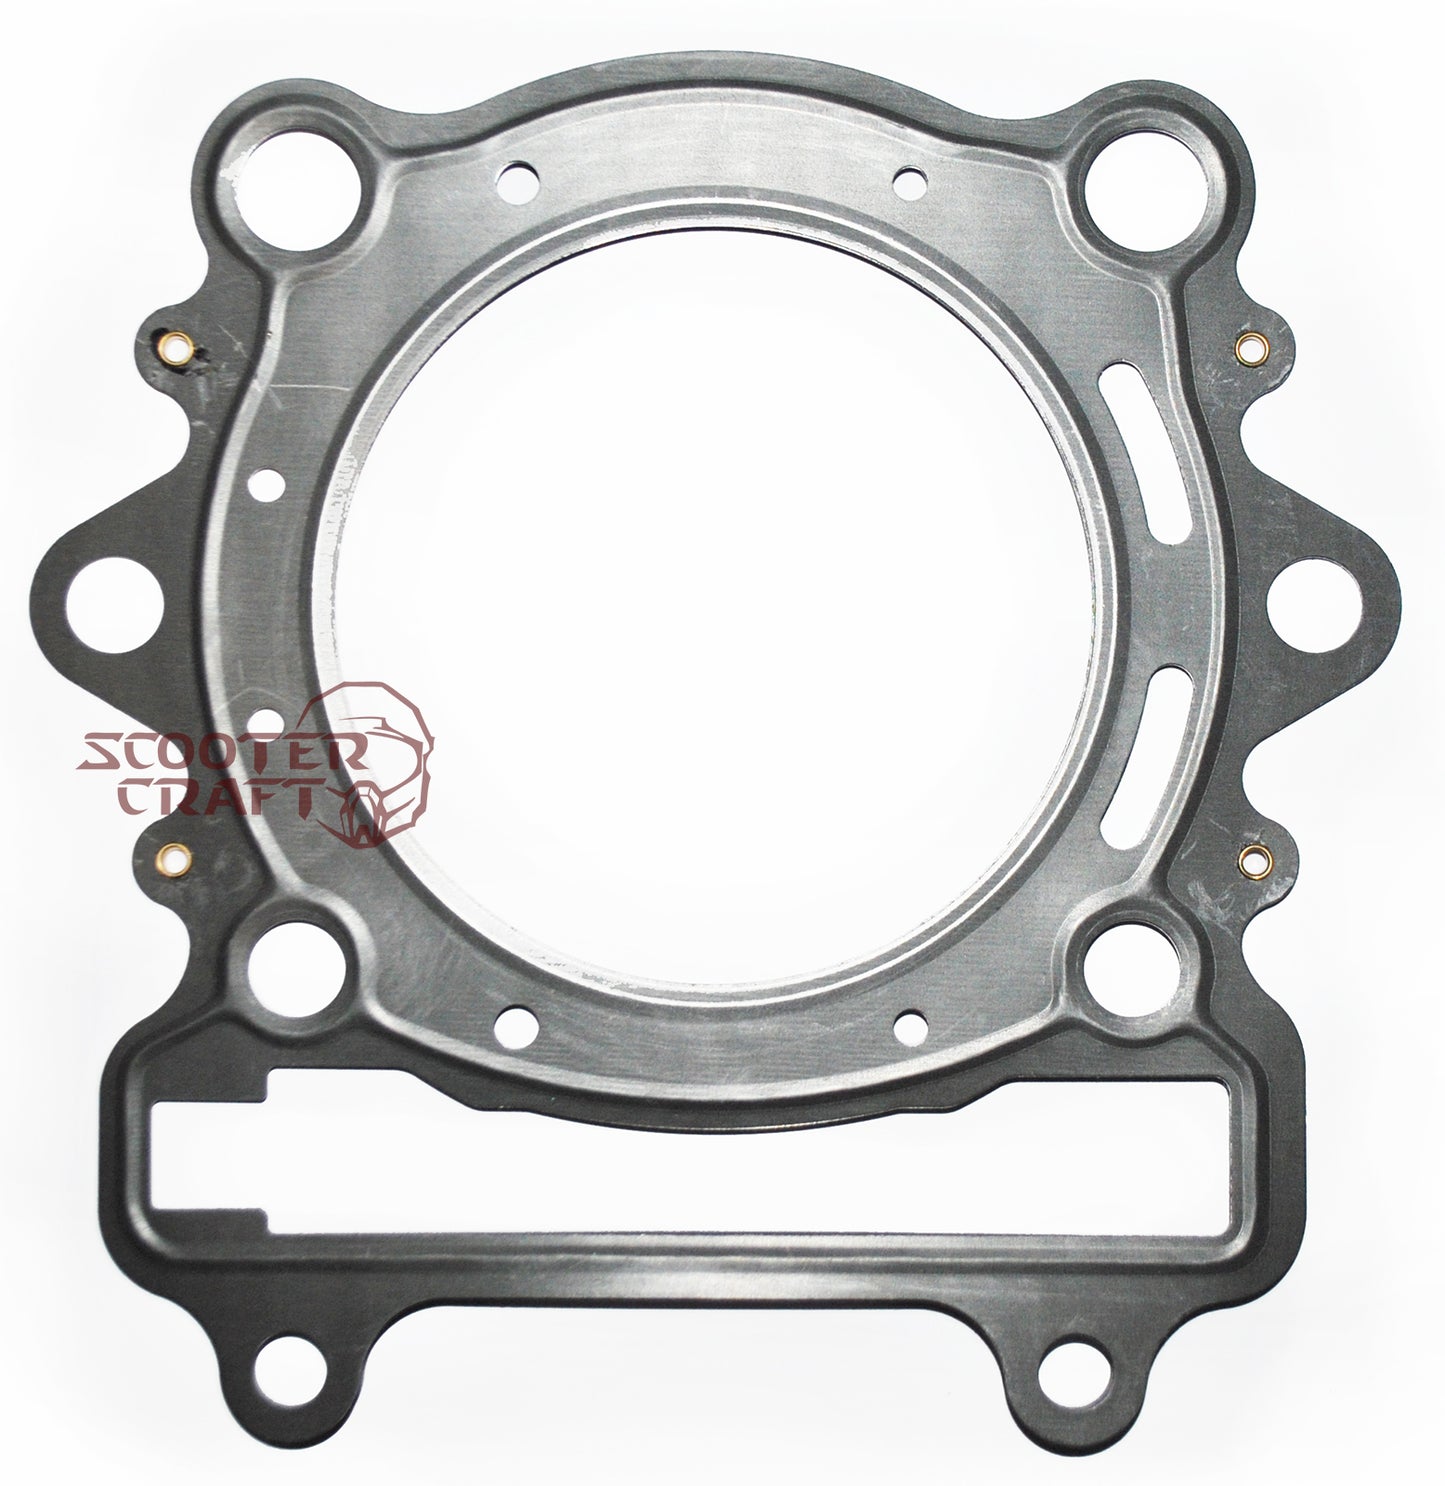 Engine gasket kit Hisun HS400, Forge 400 2015-Up, Tactic 400 2017-Up, Massimo MSU 400, Knight 400